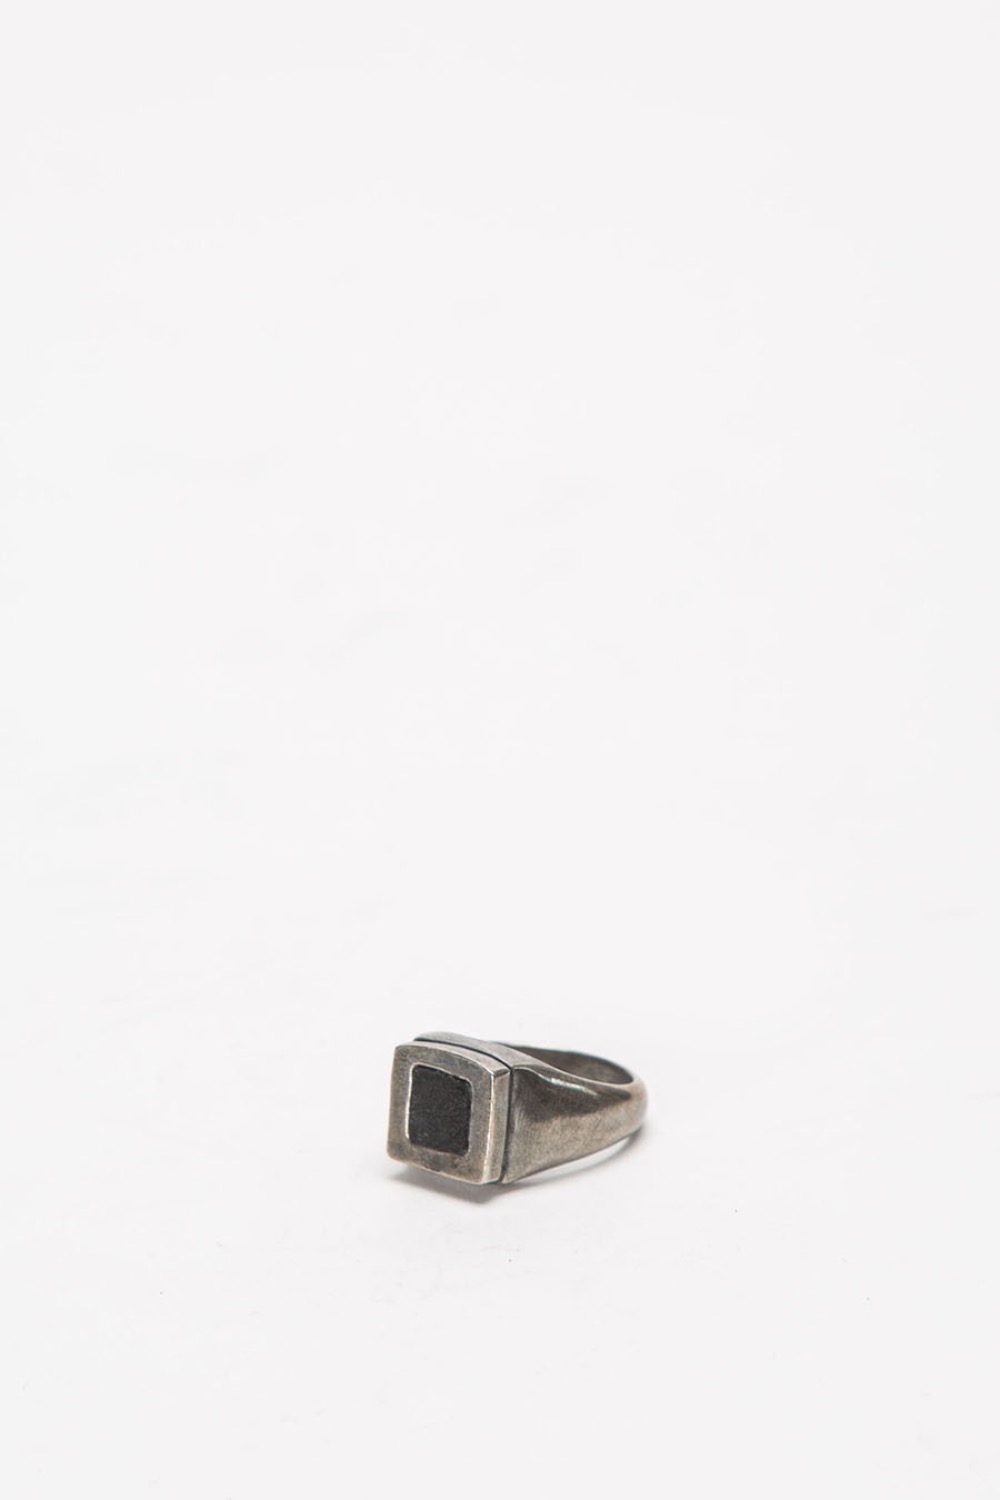 (23SS) BRUSHED SILVER 925 - RING WITH KANGAROO LEATHER DETAILS